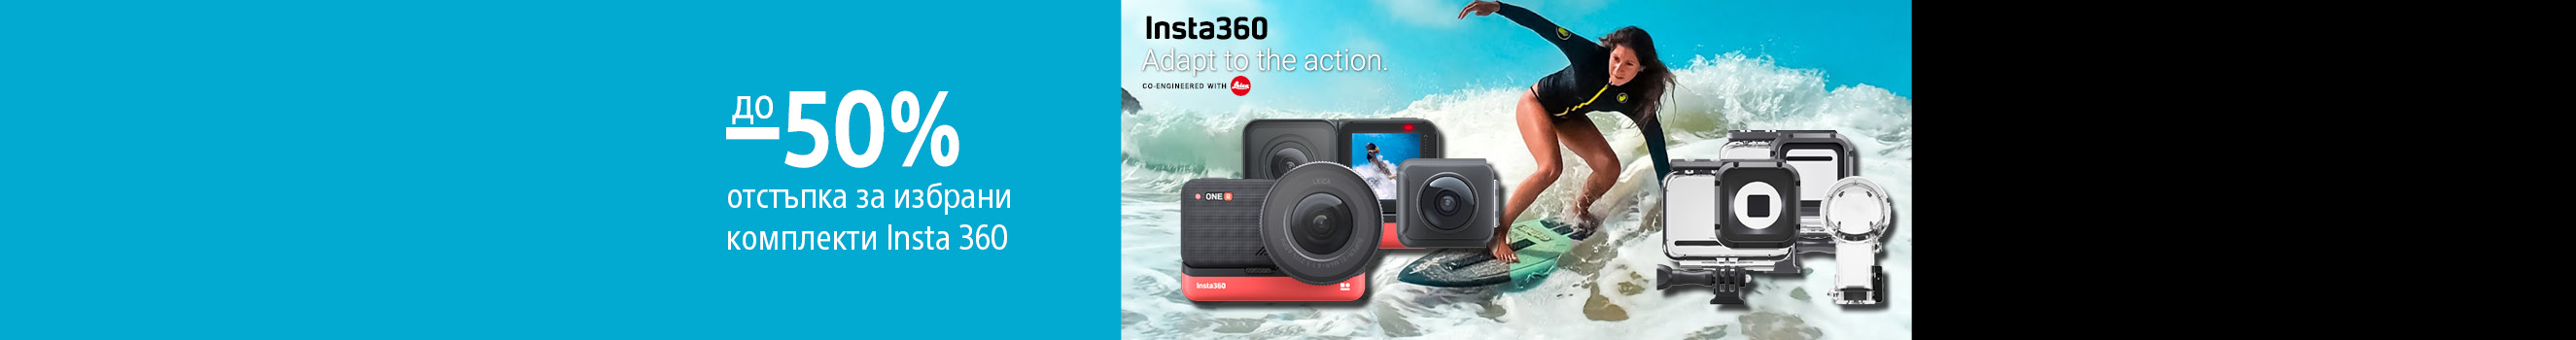  Insta360 action and 360 VR cameras with up to -50% discount in PhotoSynthesis stores